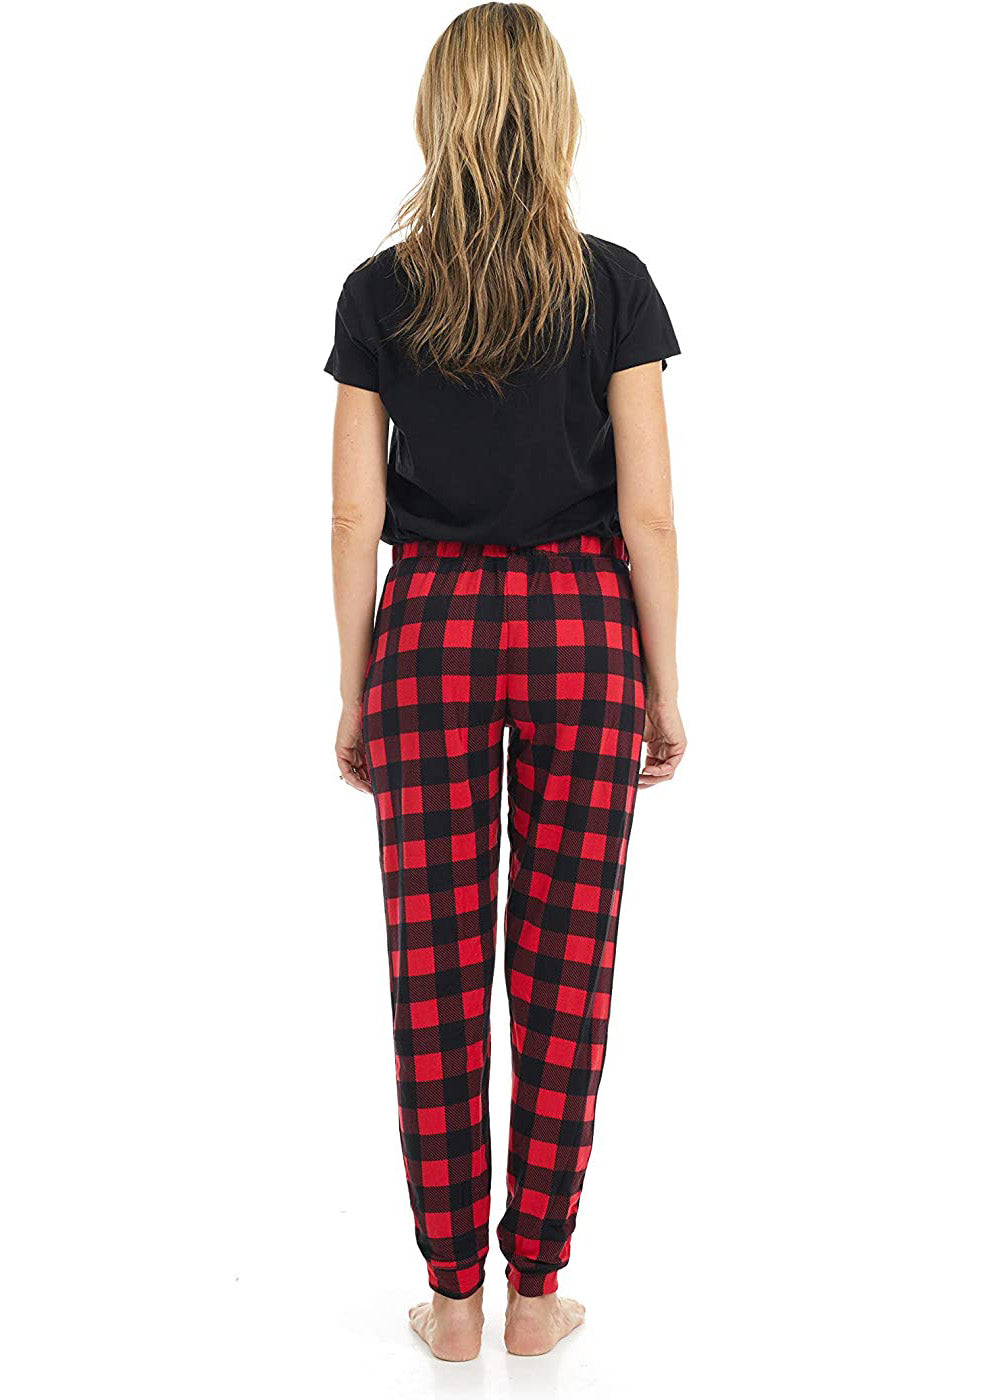 Red Plaid Stretch Pajama Bottoms – Roadrunner Jeans Apparel